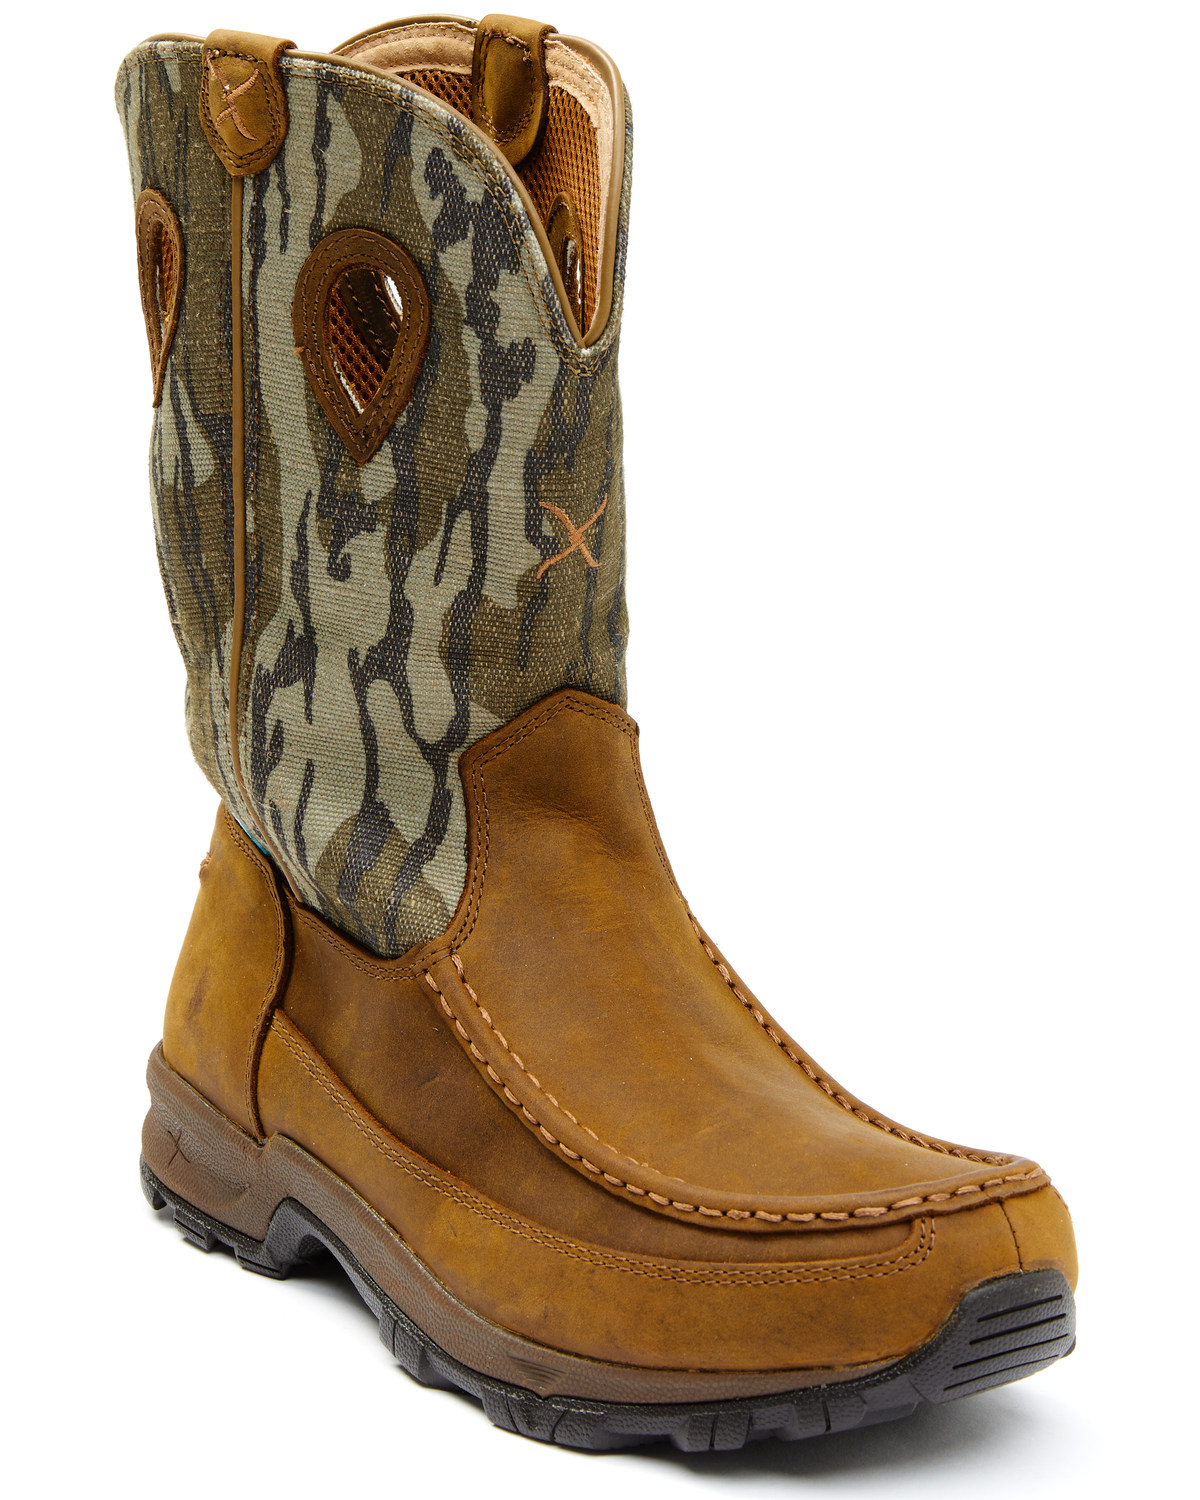 Twisted X Men's Western Work Boots - Soft Toe